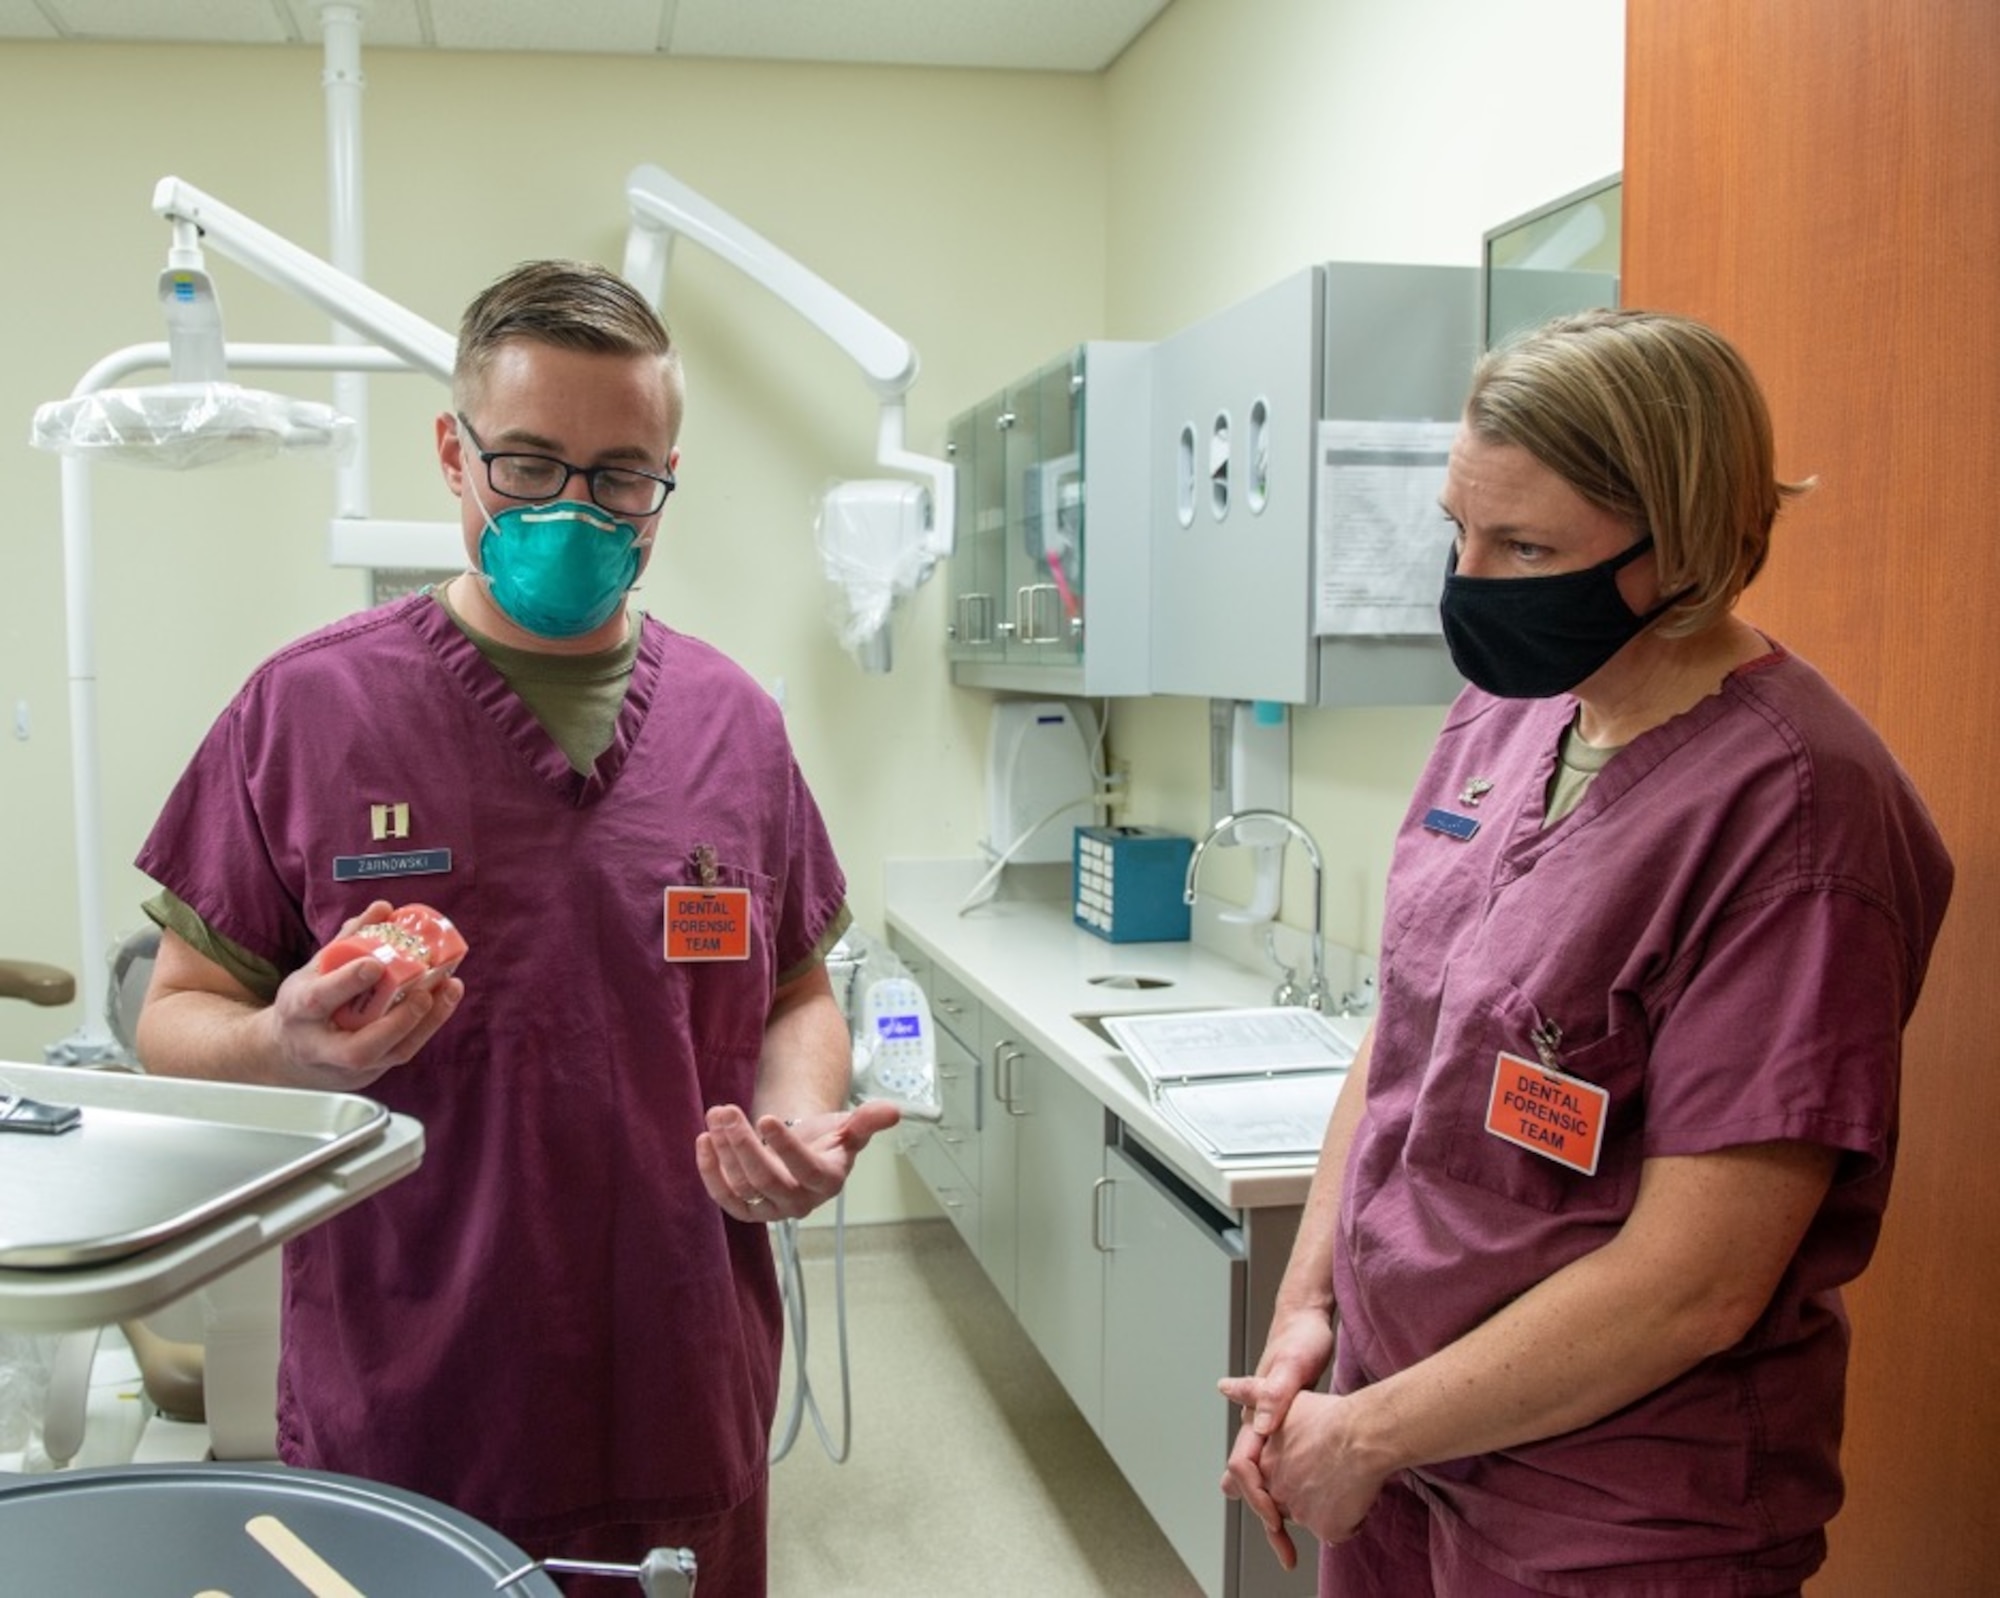 U.S. Air Force Capt. Ryan Zarnowski, left, a general dentist assigned to the 673d Dental Squadron, shows typodont model teeth to U.S. Air Force Col. Kirsten Aguilar, Joint Base Elmendorf-Richardson and 673d Air Base Wing commander, at JBER, Alaska, March 2, 2021.